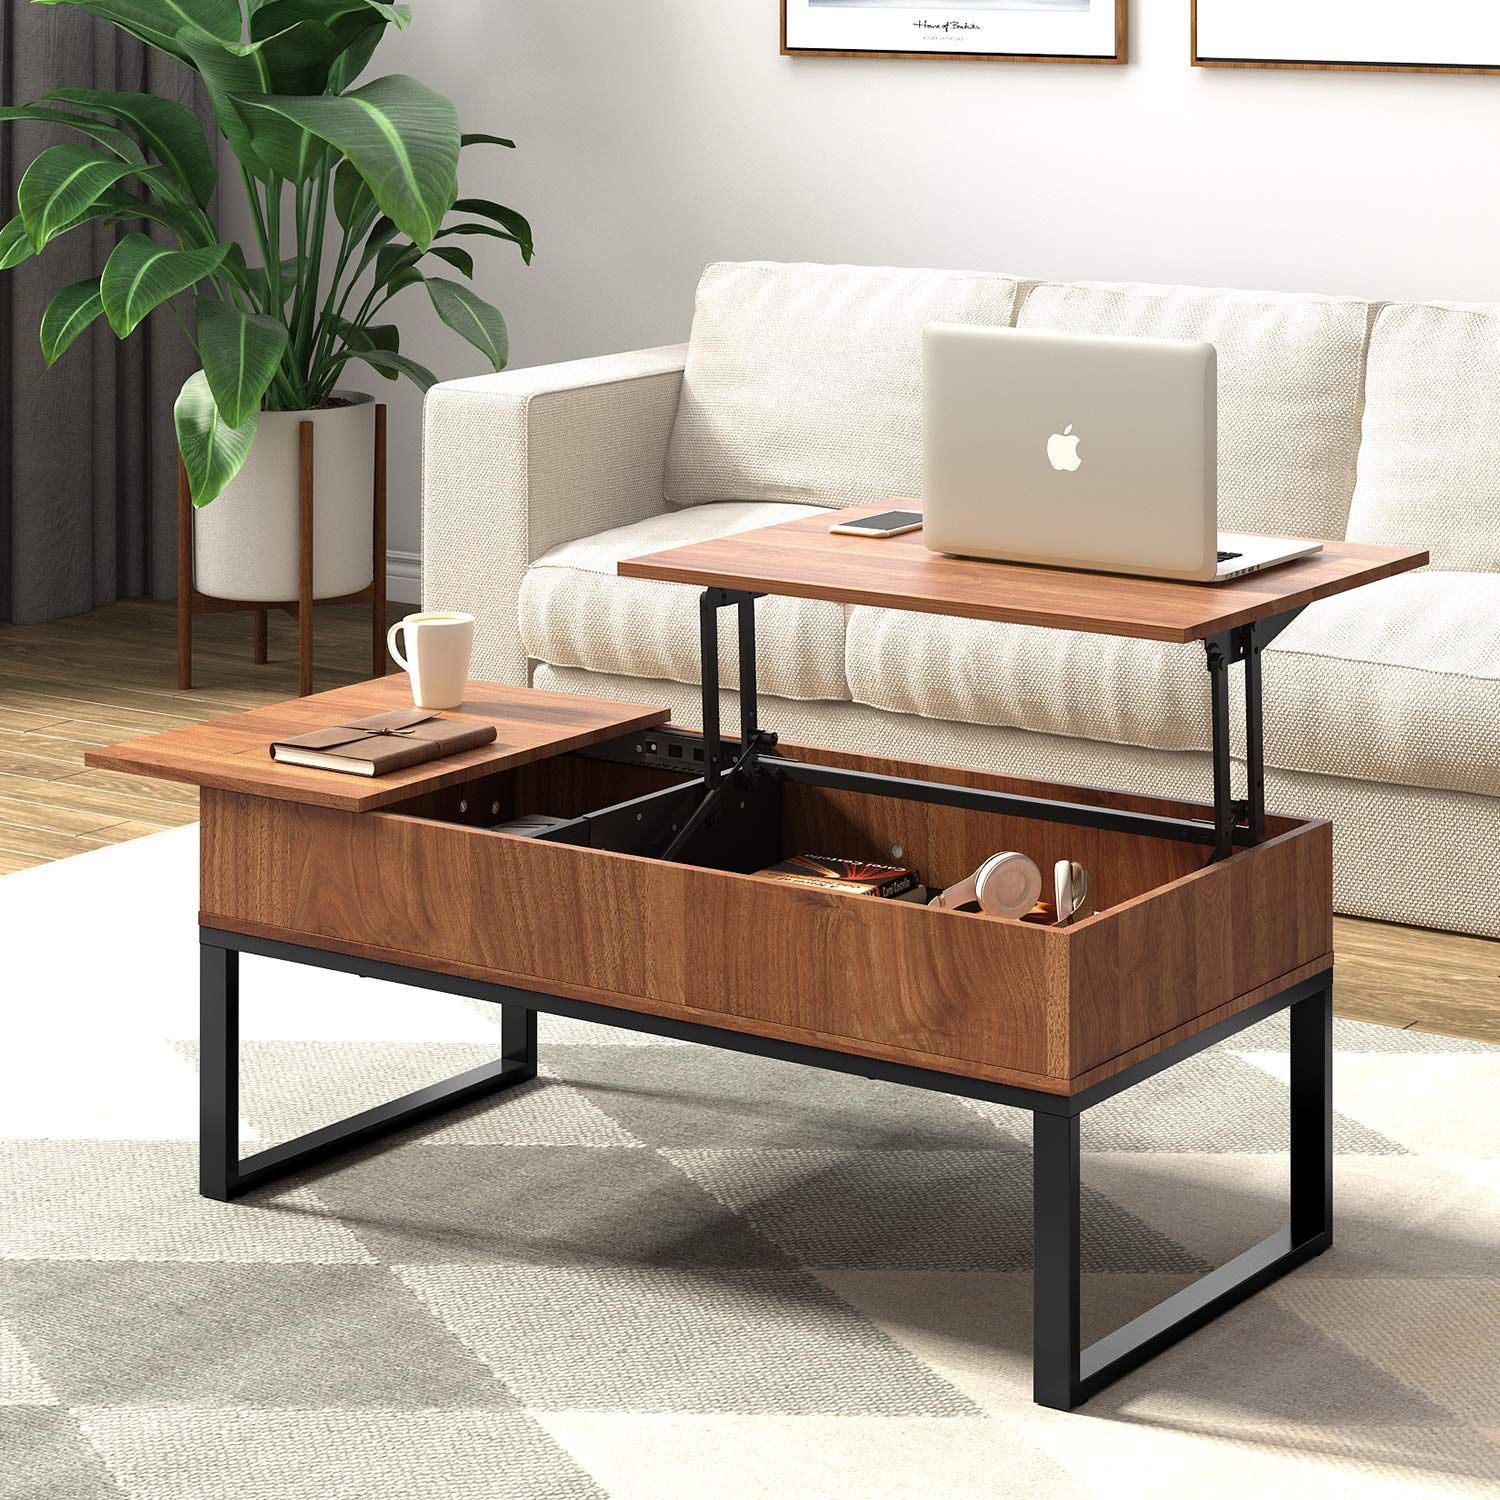 Wlive Wood Coffee Table With Adjustable Lift Top Table, Metal Frame Pertaining To Lift Top Coffee Tables With Hidden Storage Compartments (View 15 of 15)